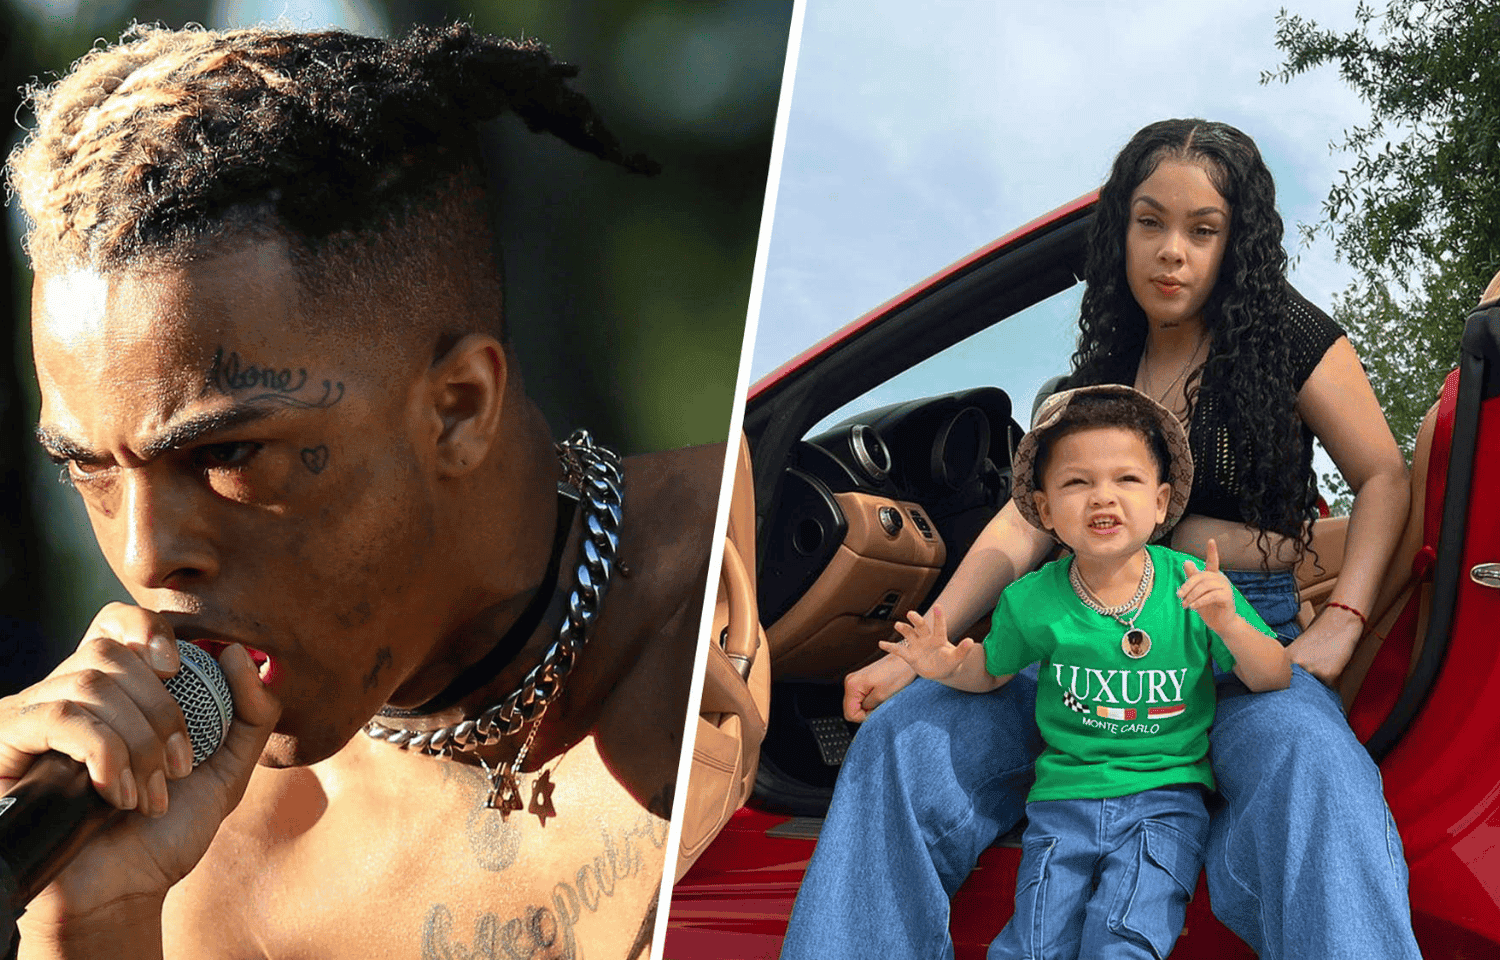 XXXTentacion Family: How Many Children Does He Have?